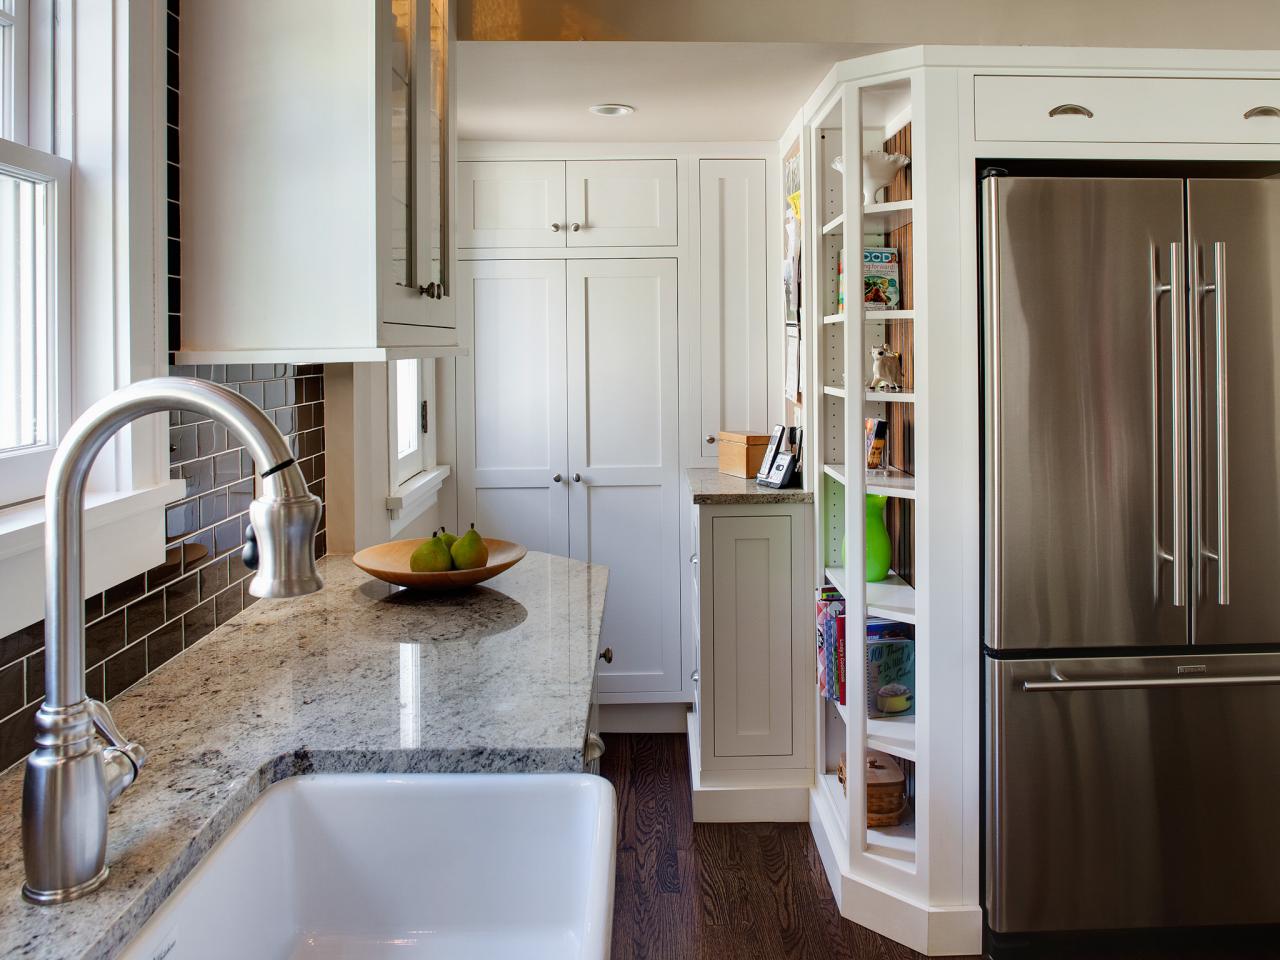 Tall Kitchen Cabinets: Pictures, Ideas & Tips From HGTV | HGTV